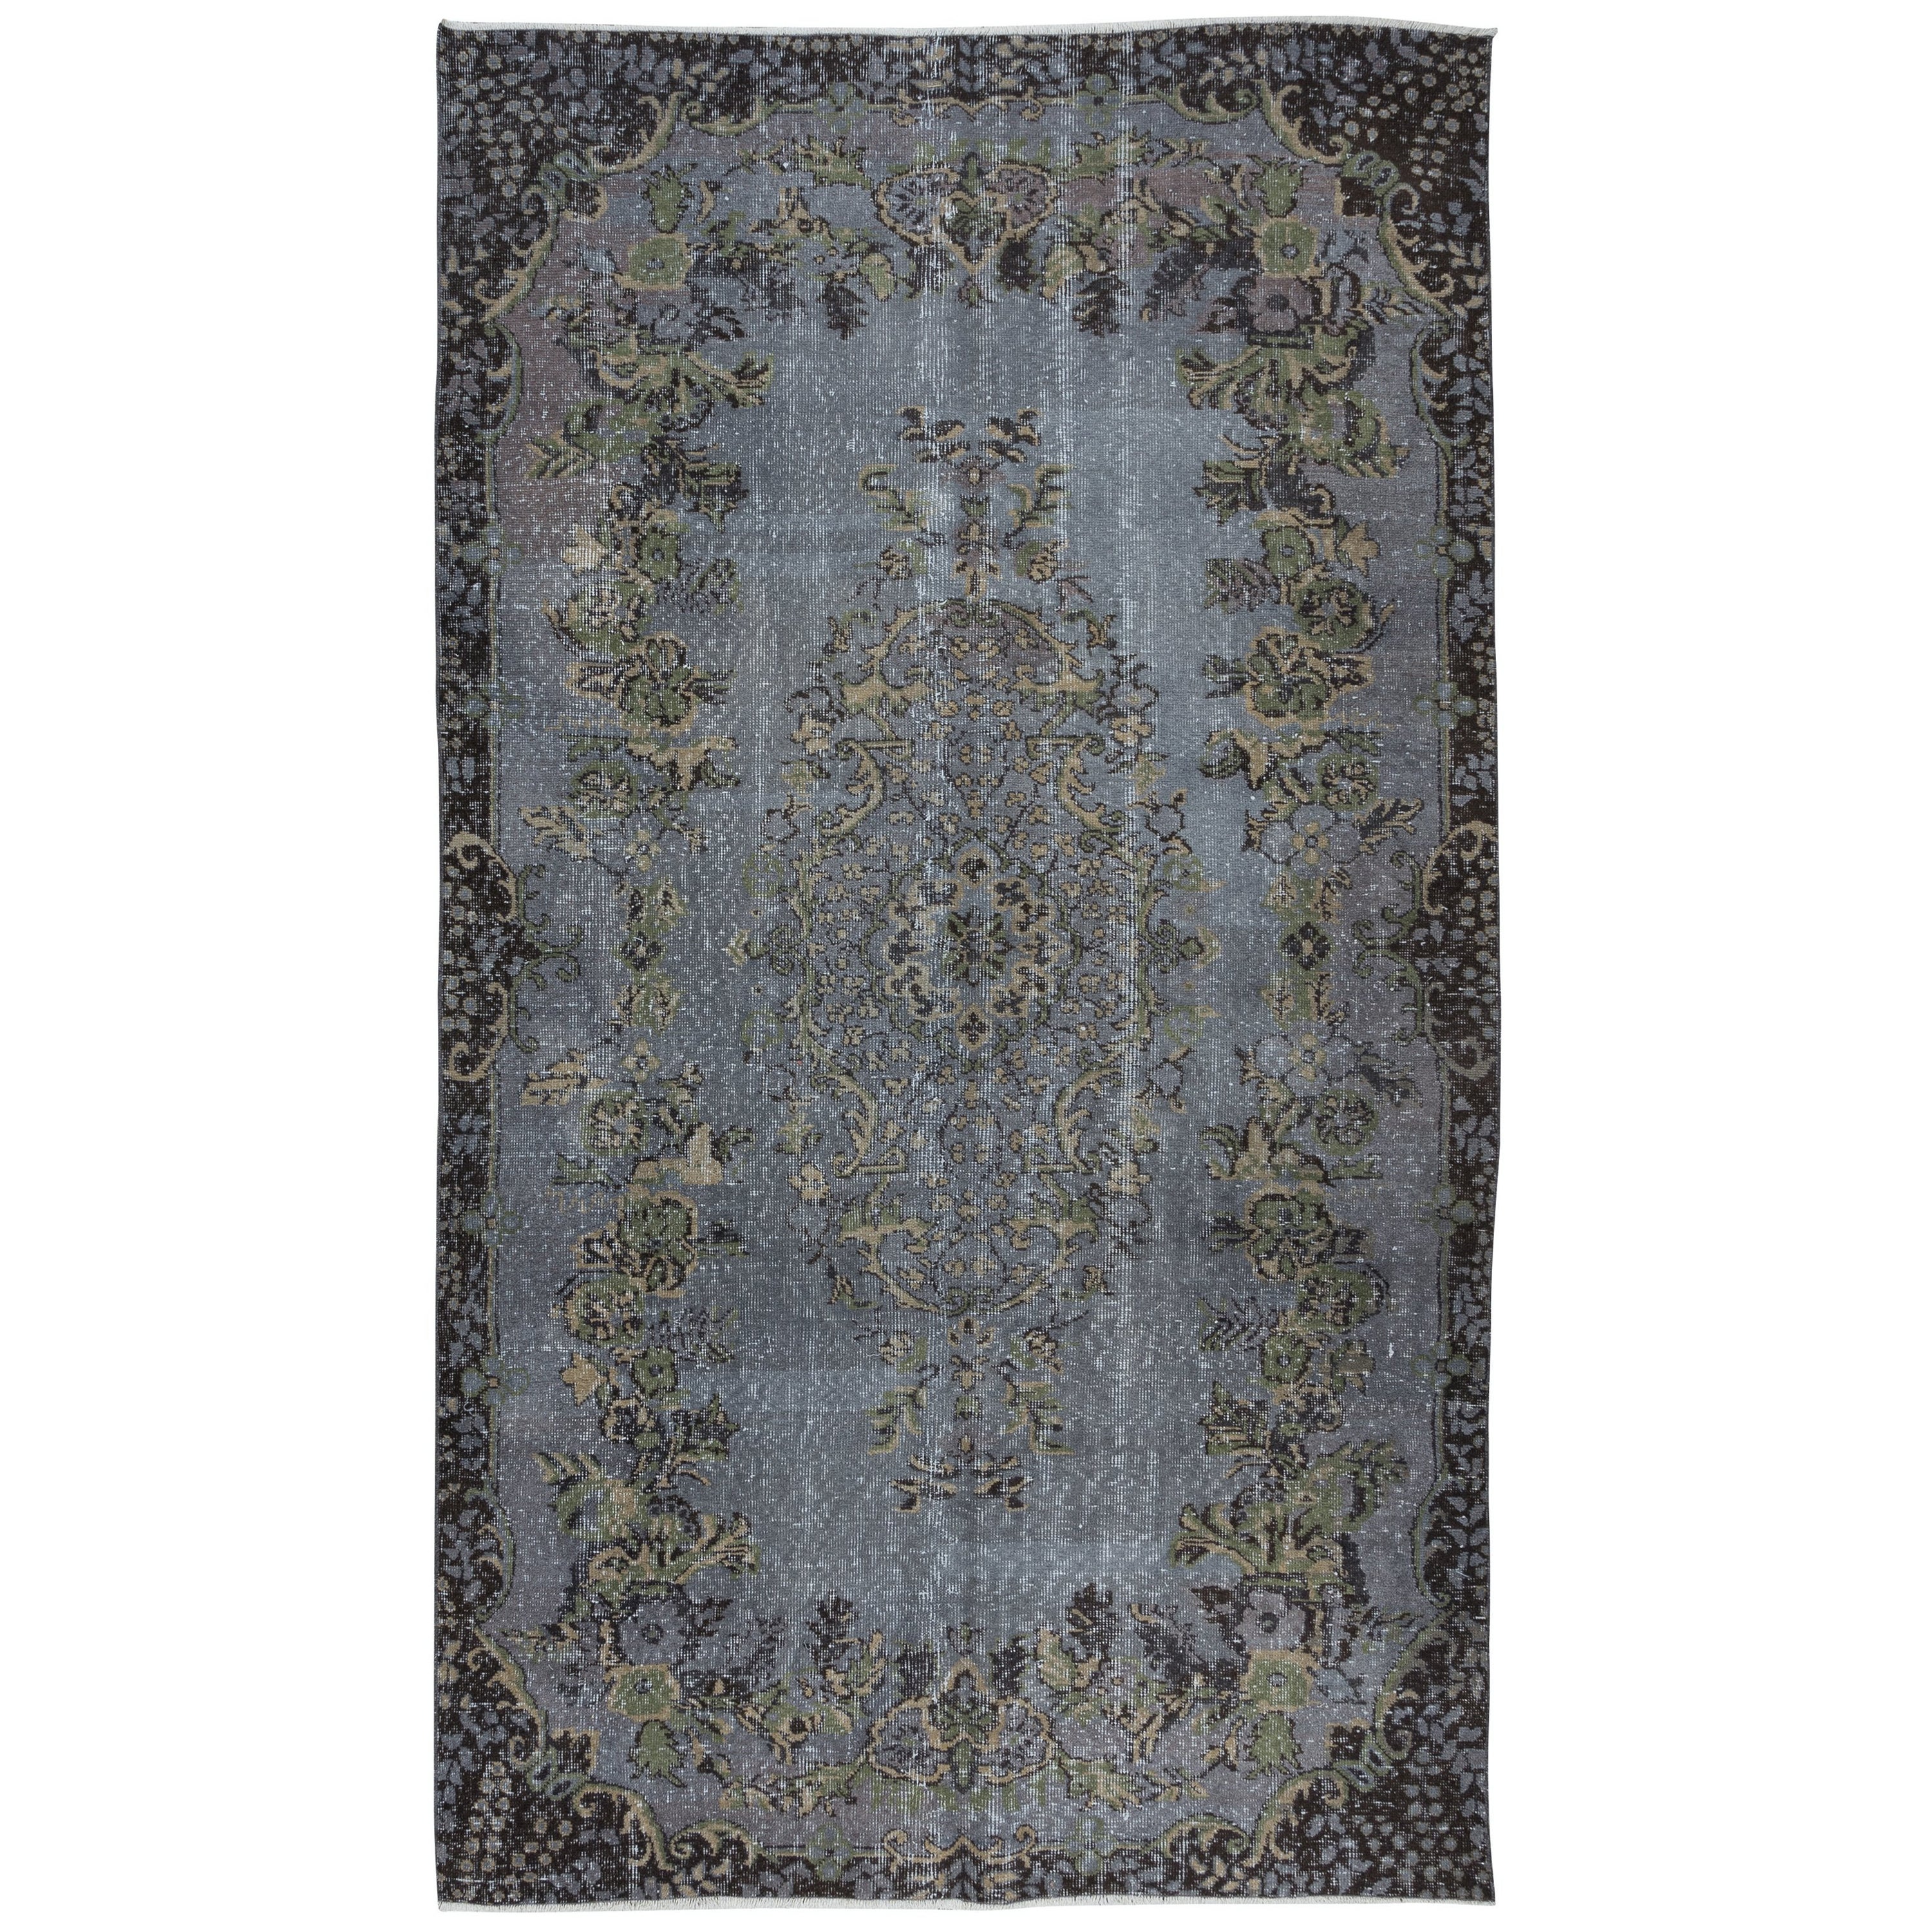 5.7x9.8 Ft Hand-Made Turkish Rug with Medallion in Iron Gray, Beige & Army Green For Sale